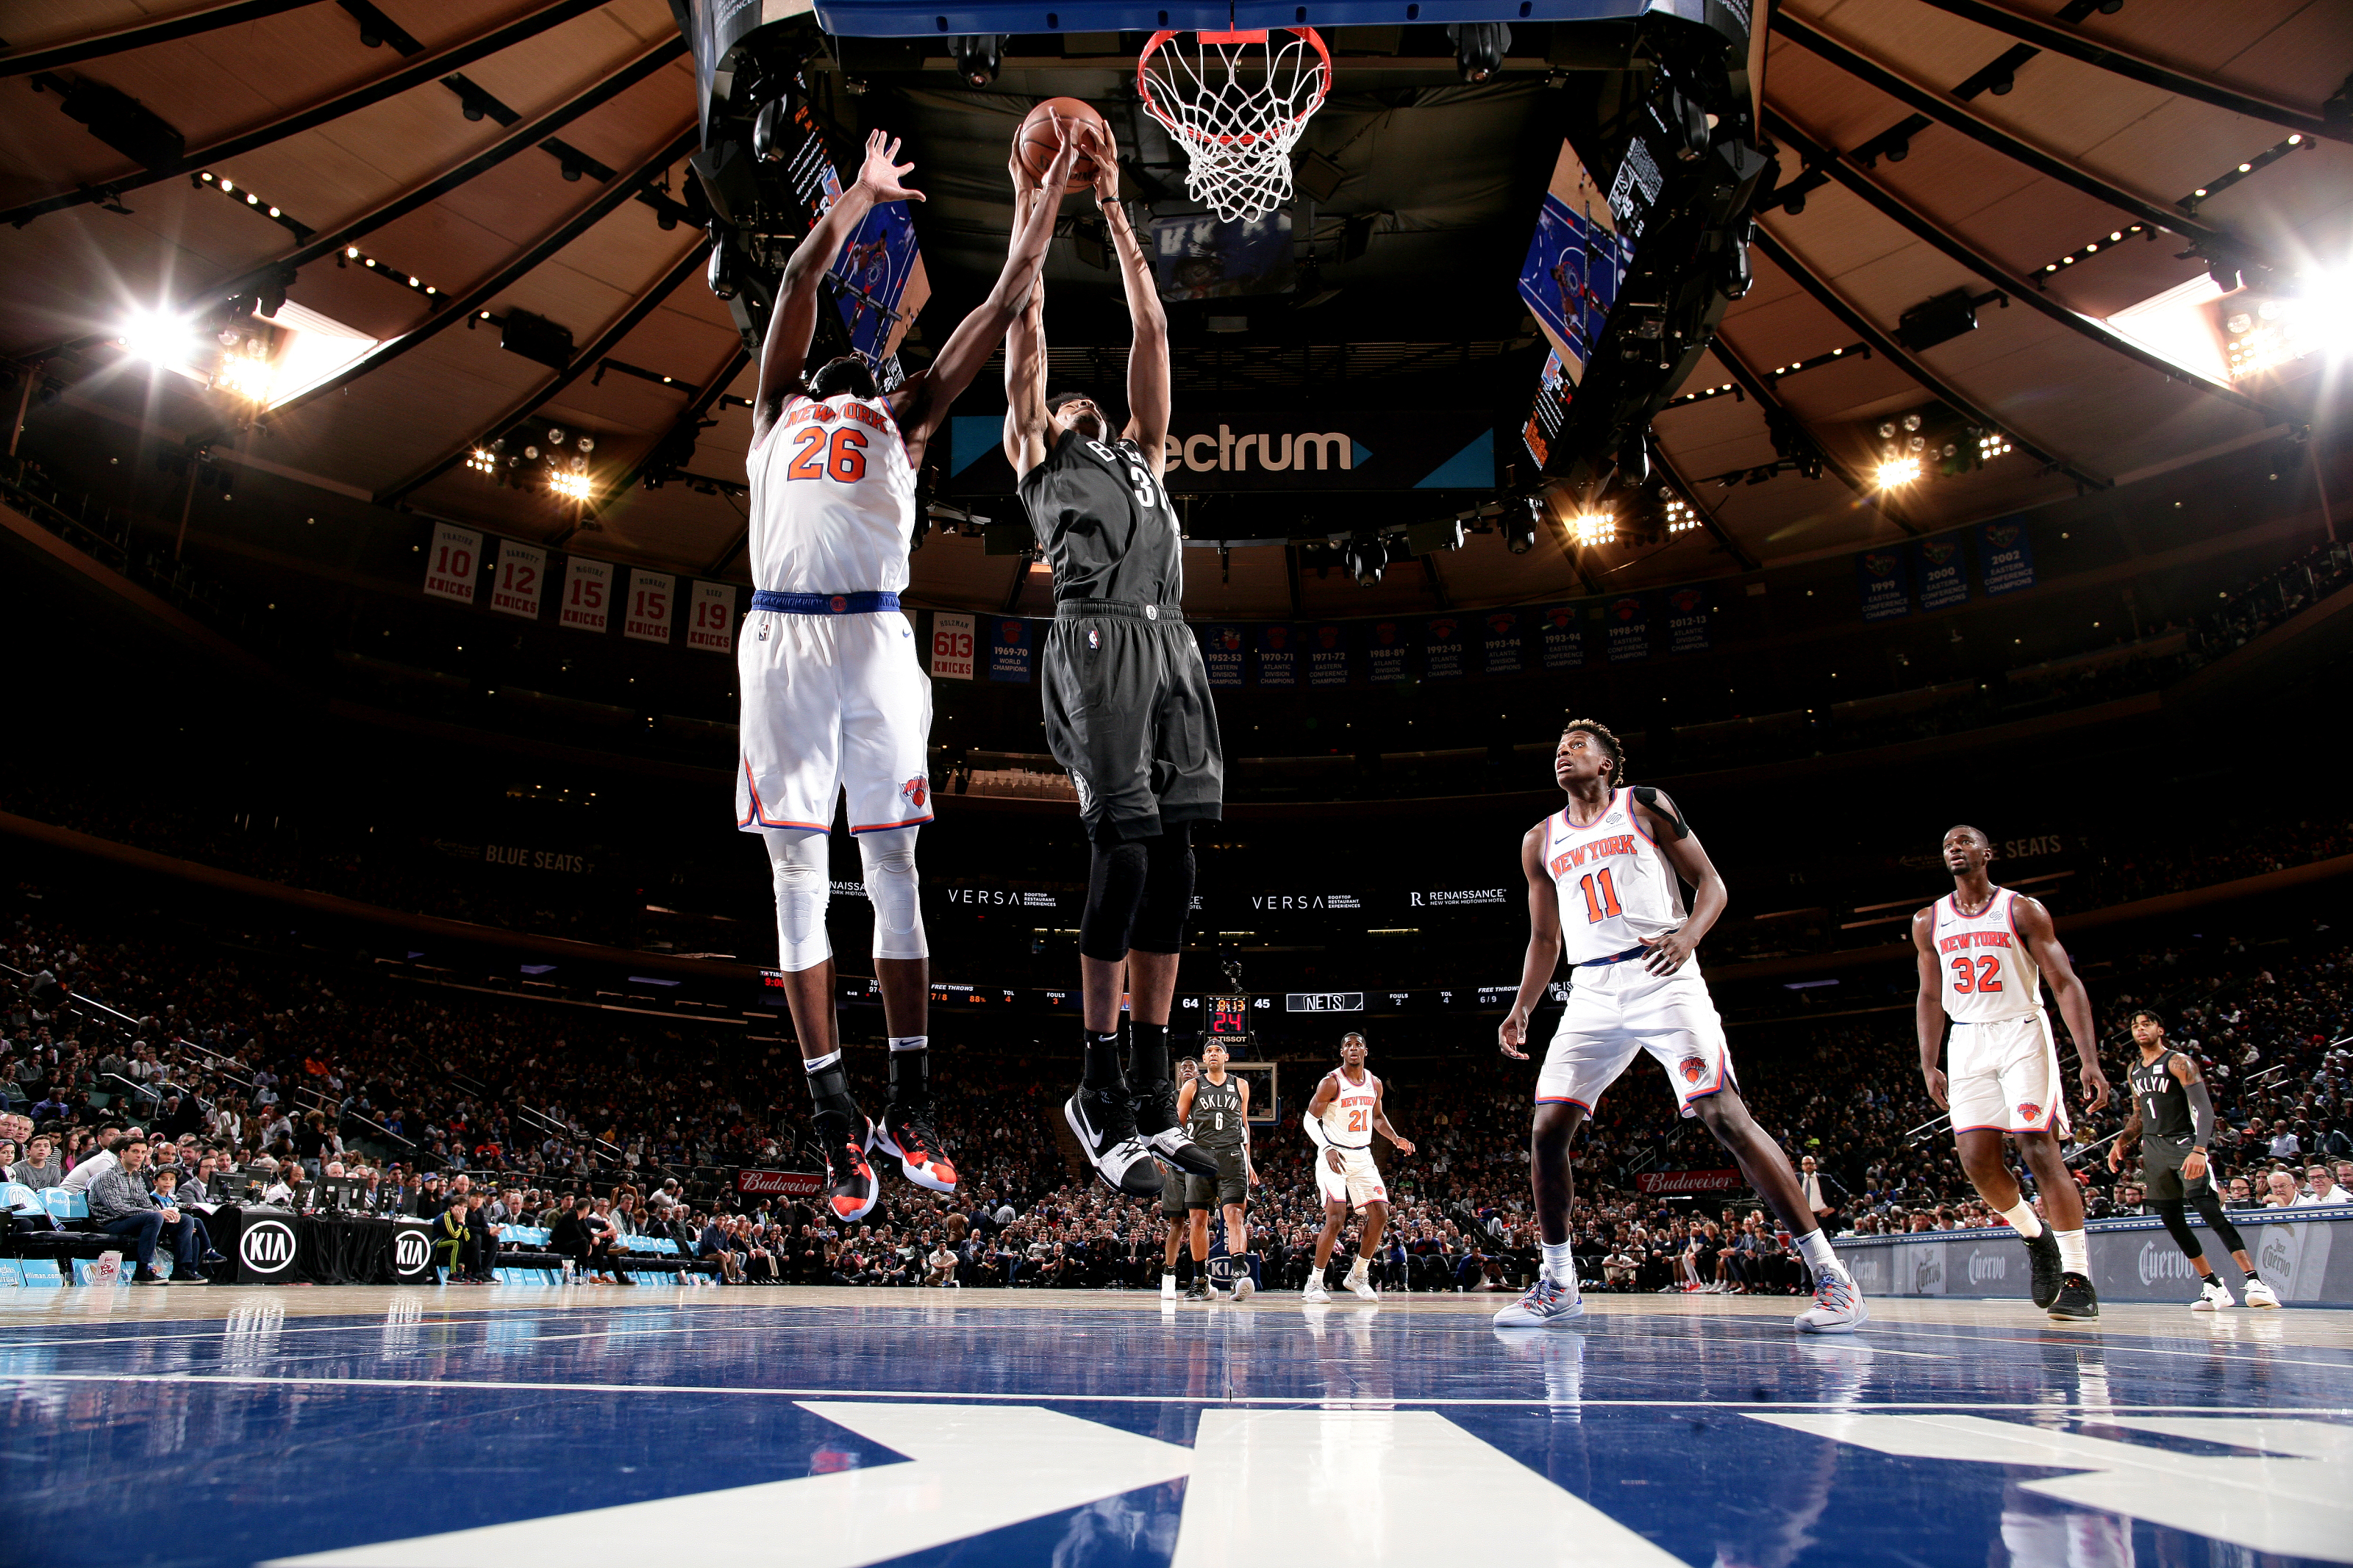 Watch Live: Brooklyn Nets at New York Knicks, 7:30 PM EST on YES